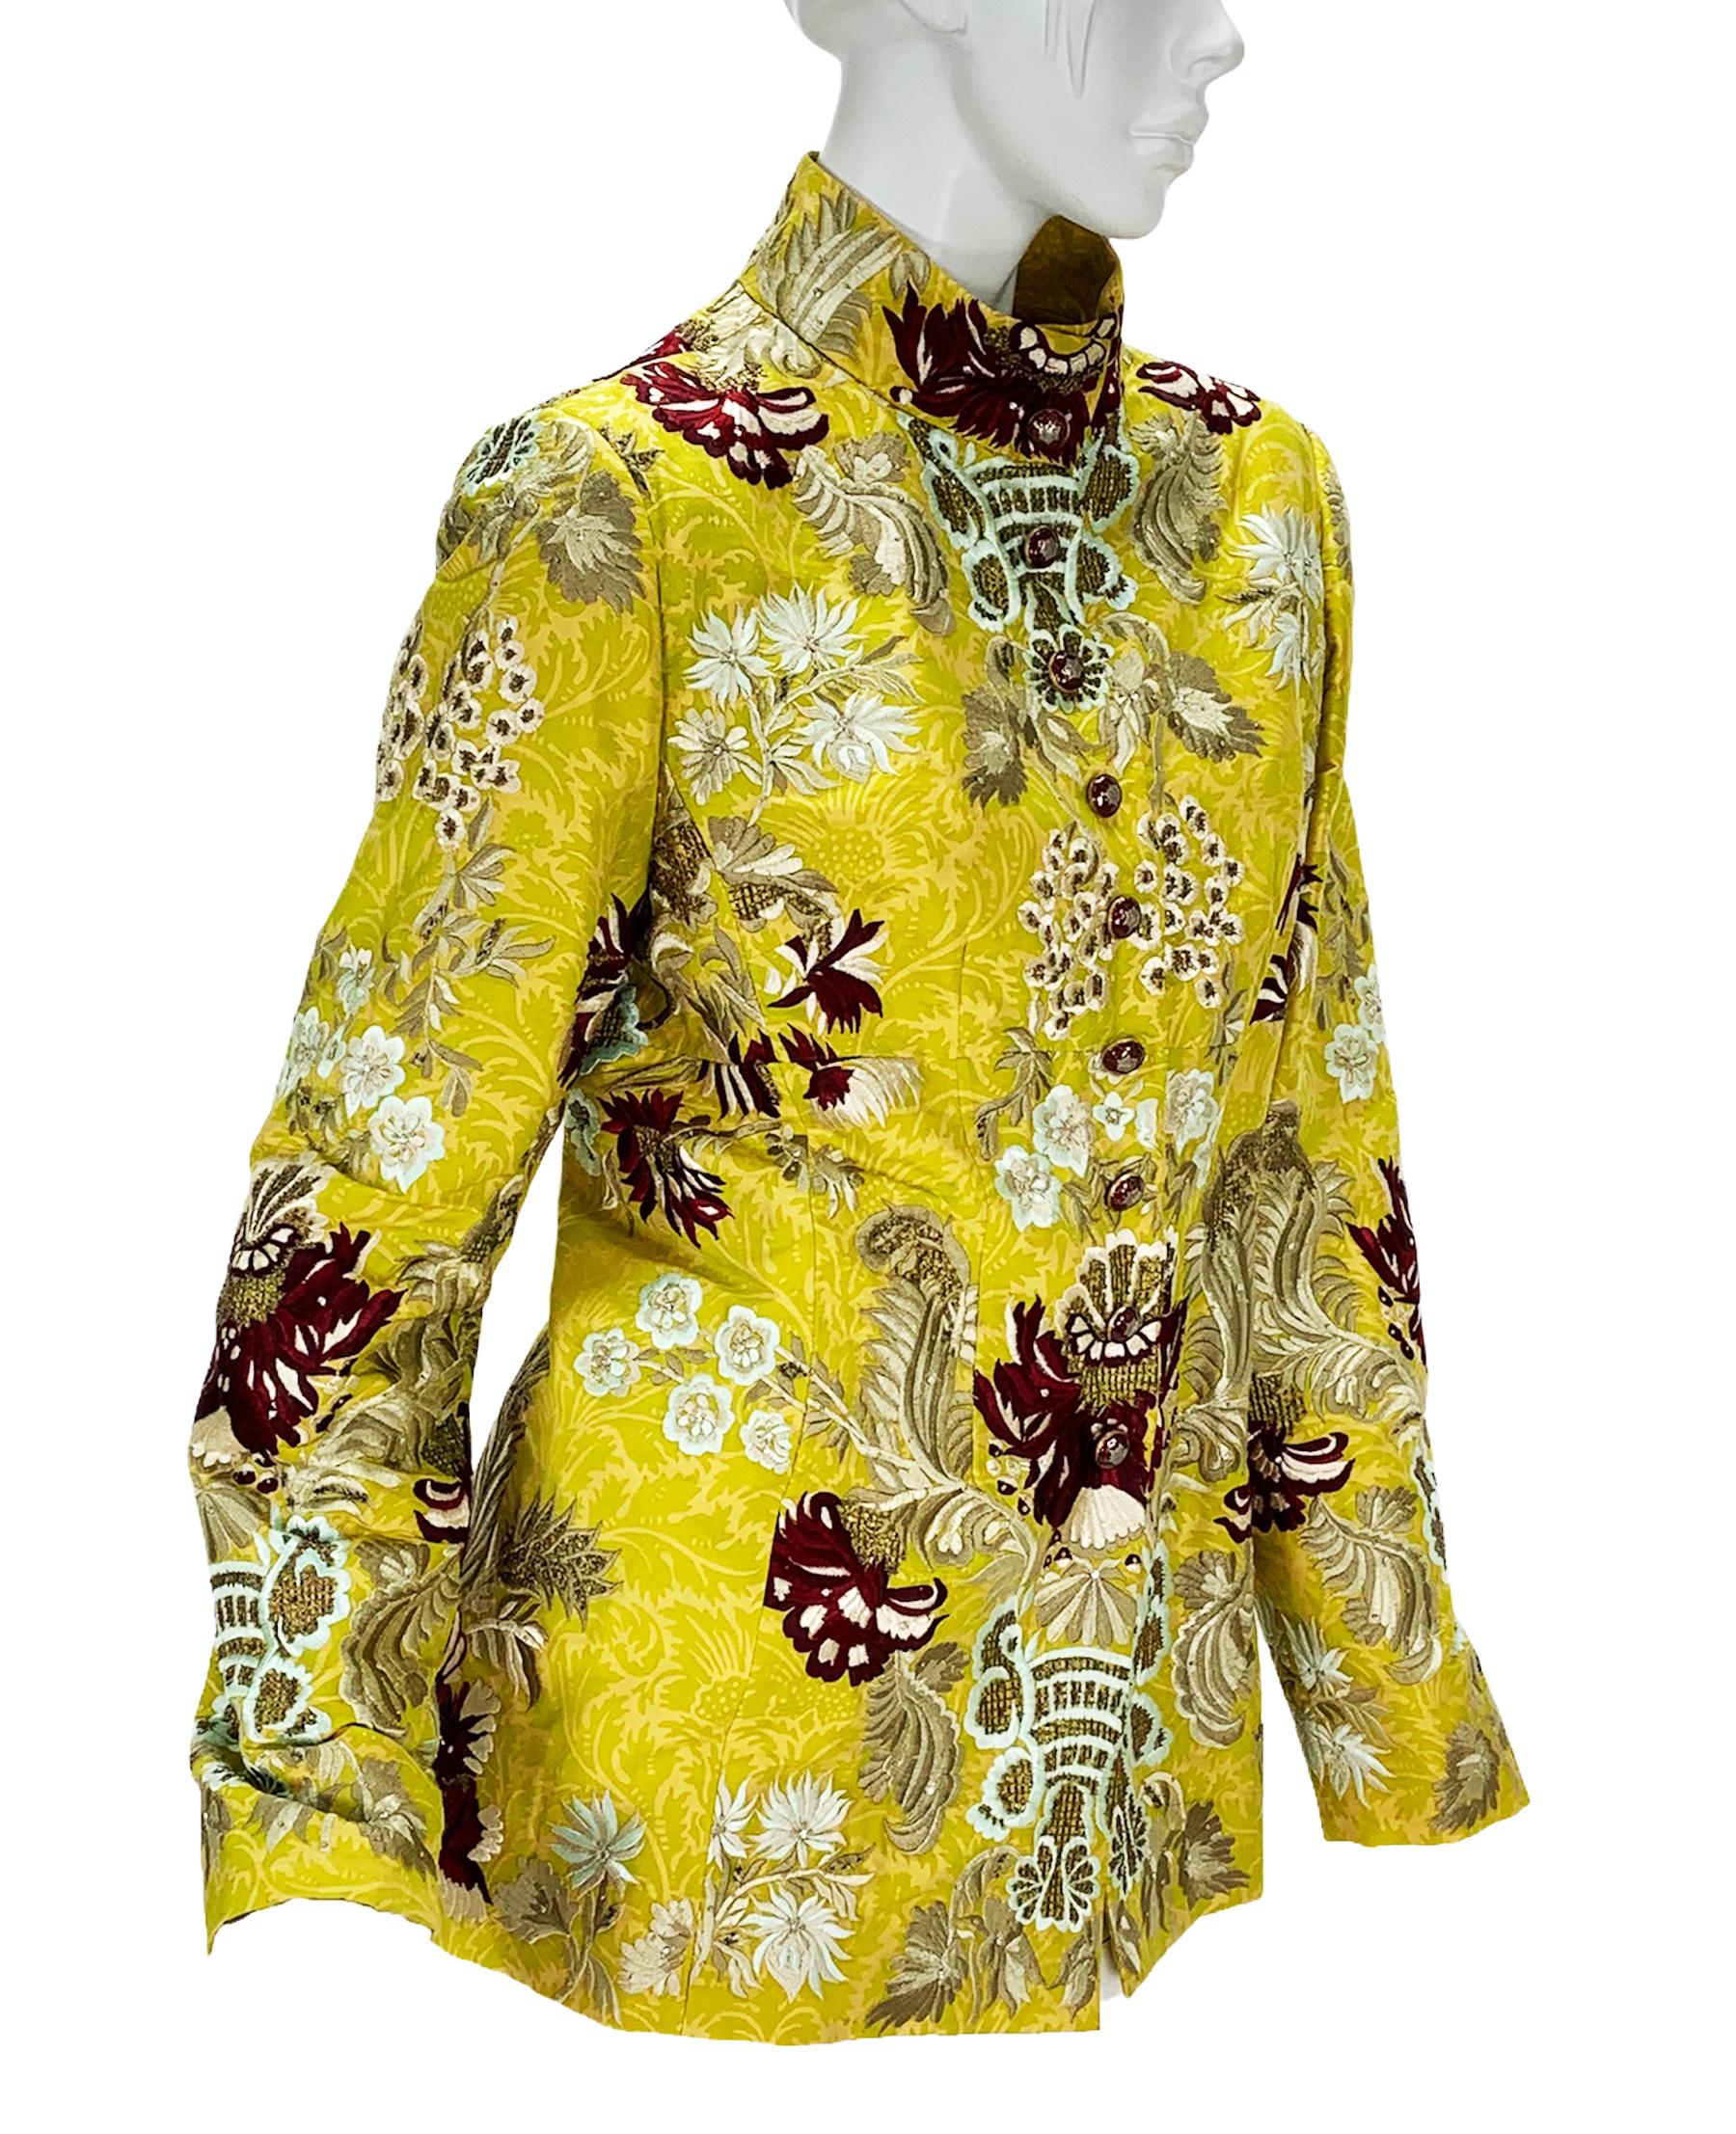 Oscar De La Renta for Neiman Marcus Silk Embroidered Long Jacket
Label size missing
F/W 2003 Collection
Silky jacquard fabric with soft green lives print over the yellow background, exclusively embroidered and sequin embellished, enamel decorative